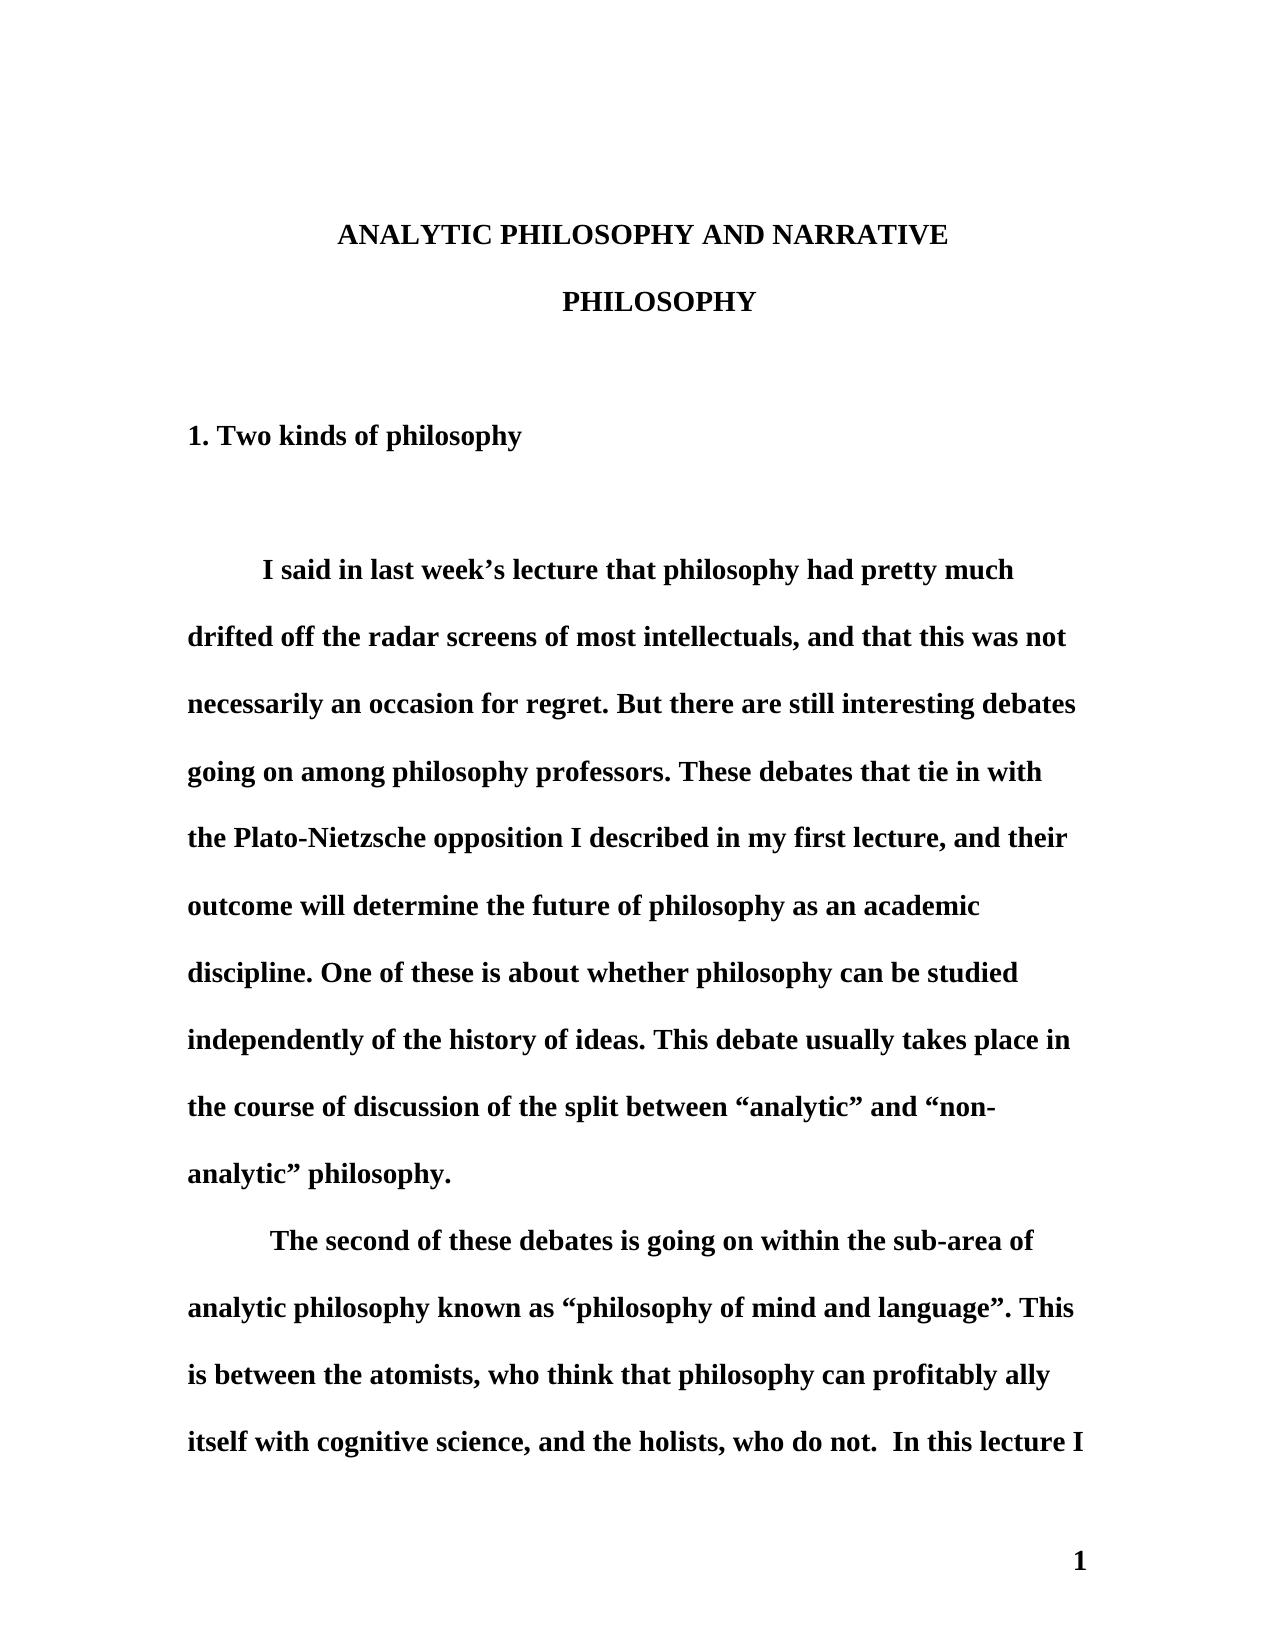 Analytic Philosophy and Narrative Philosophy - Essay